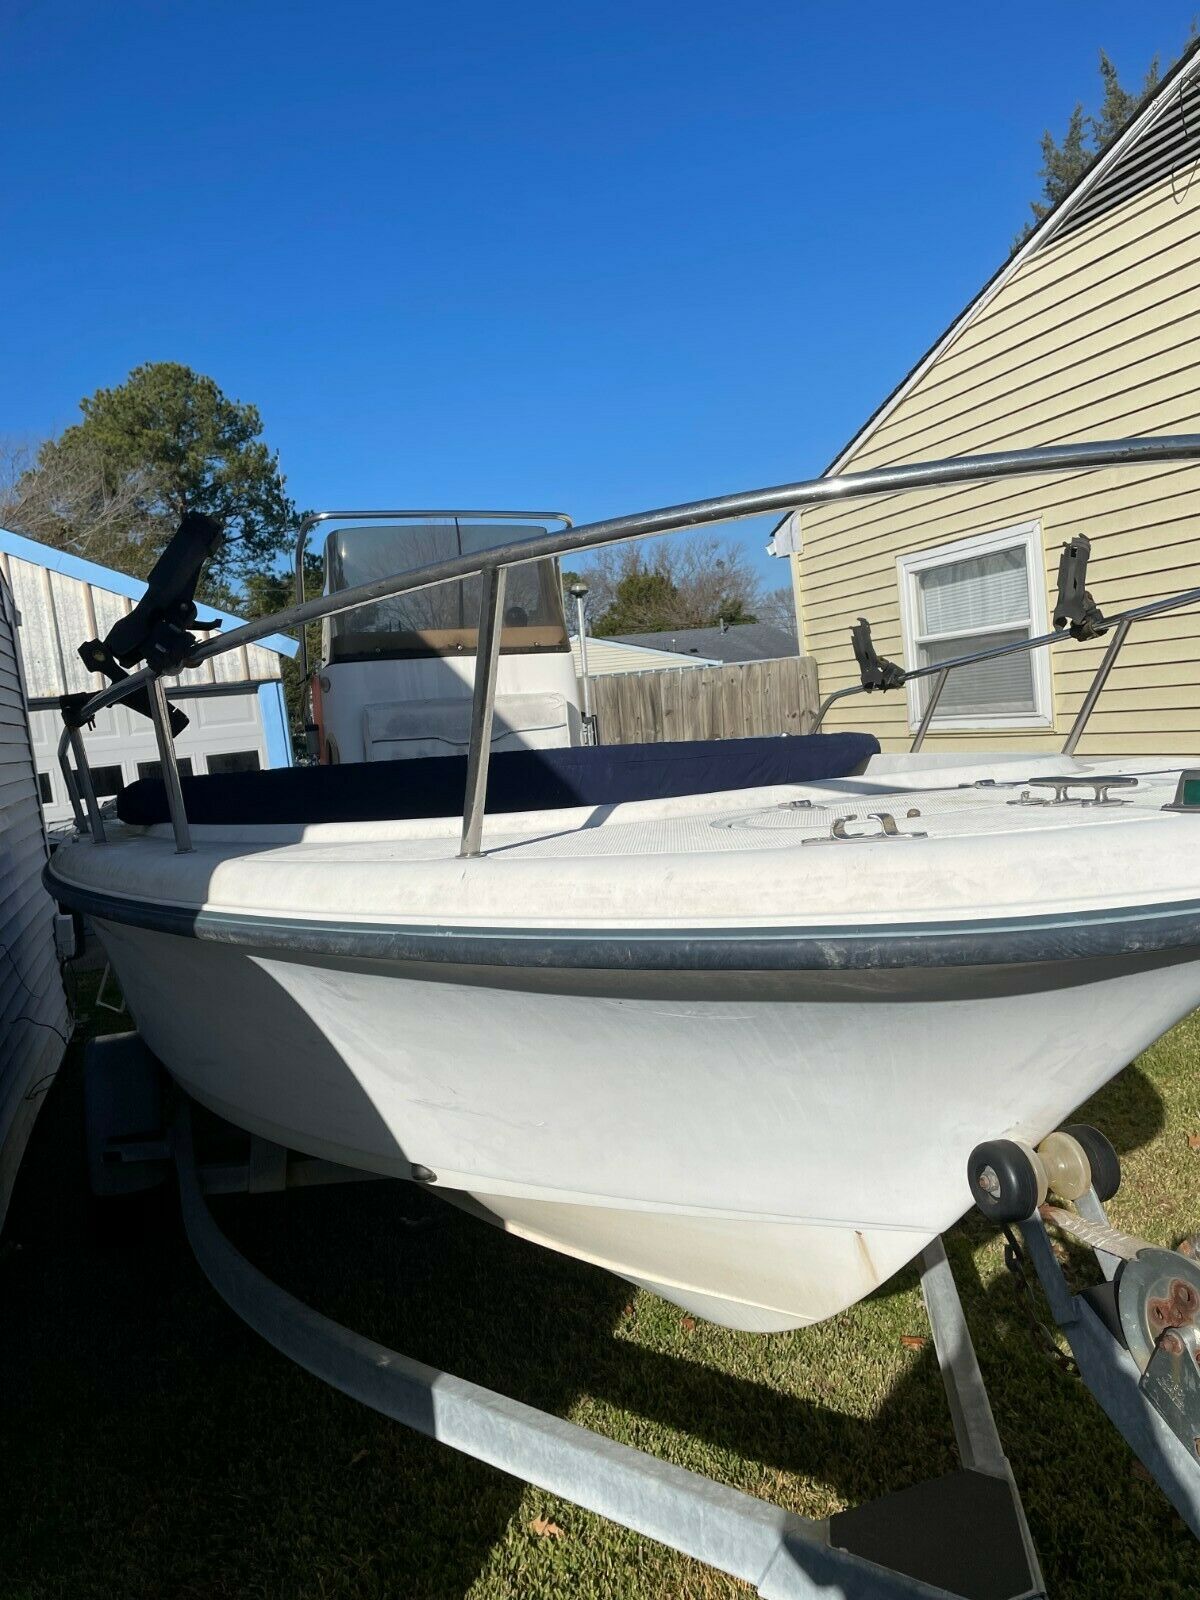 Trailer 1998 Escort And Sea Hunt Boat For Sale 19.6 Ft Needs Motor And Fuel Tank